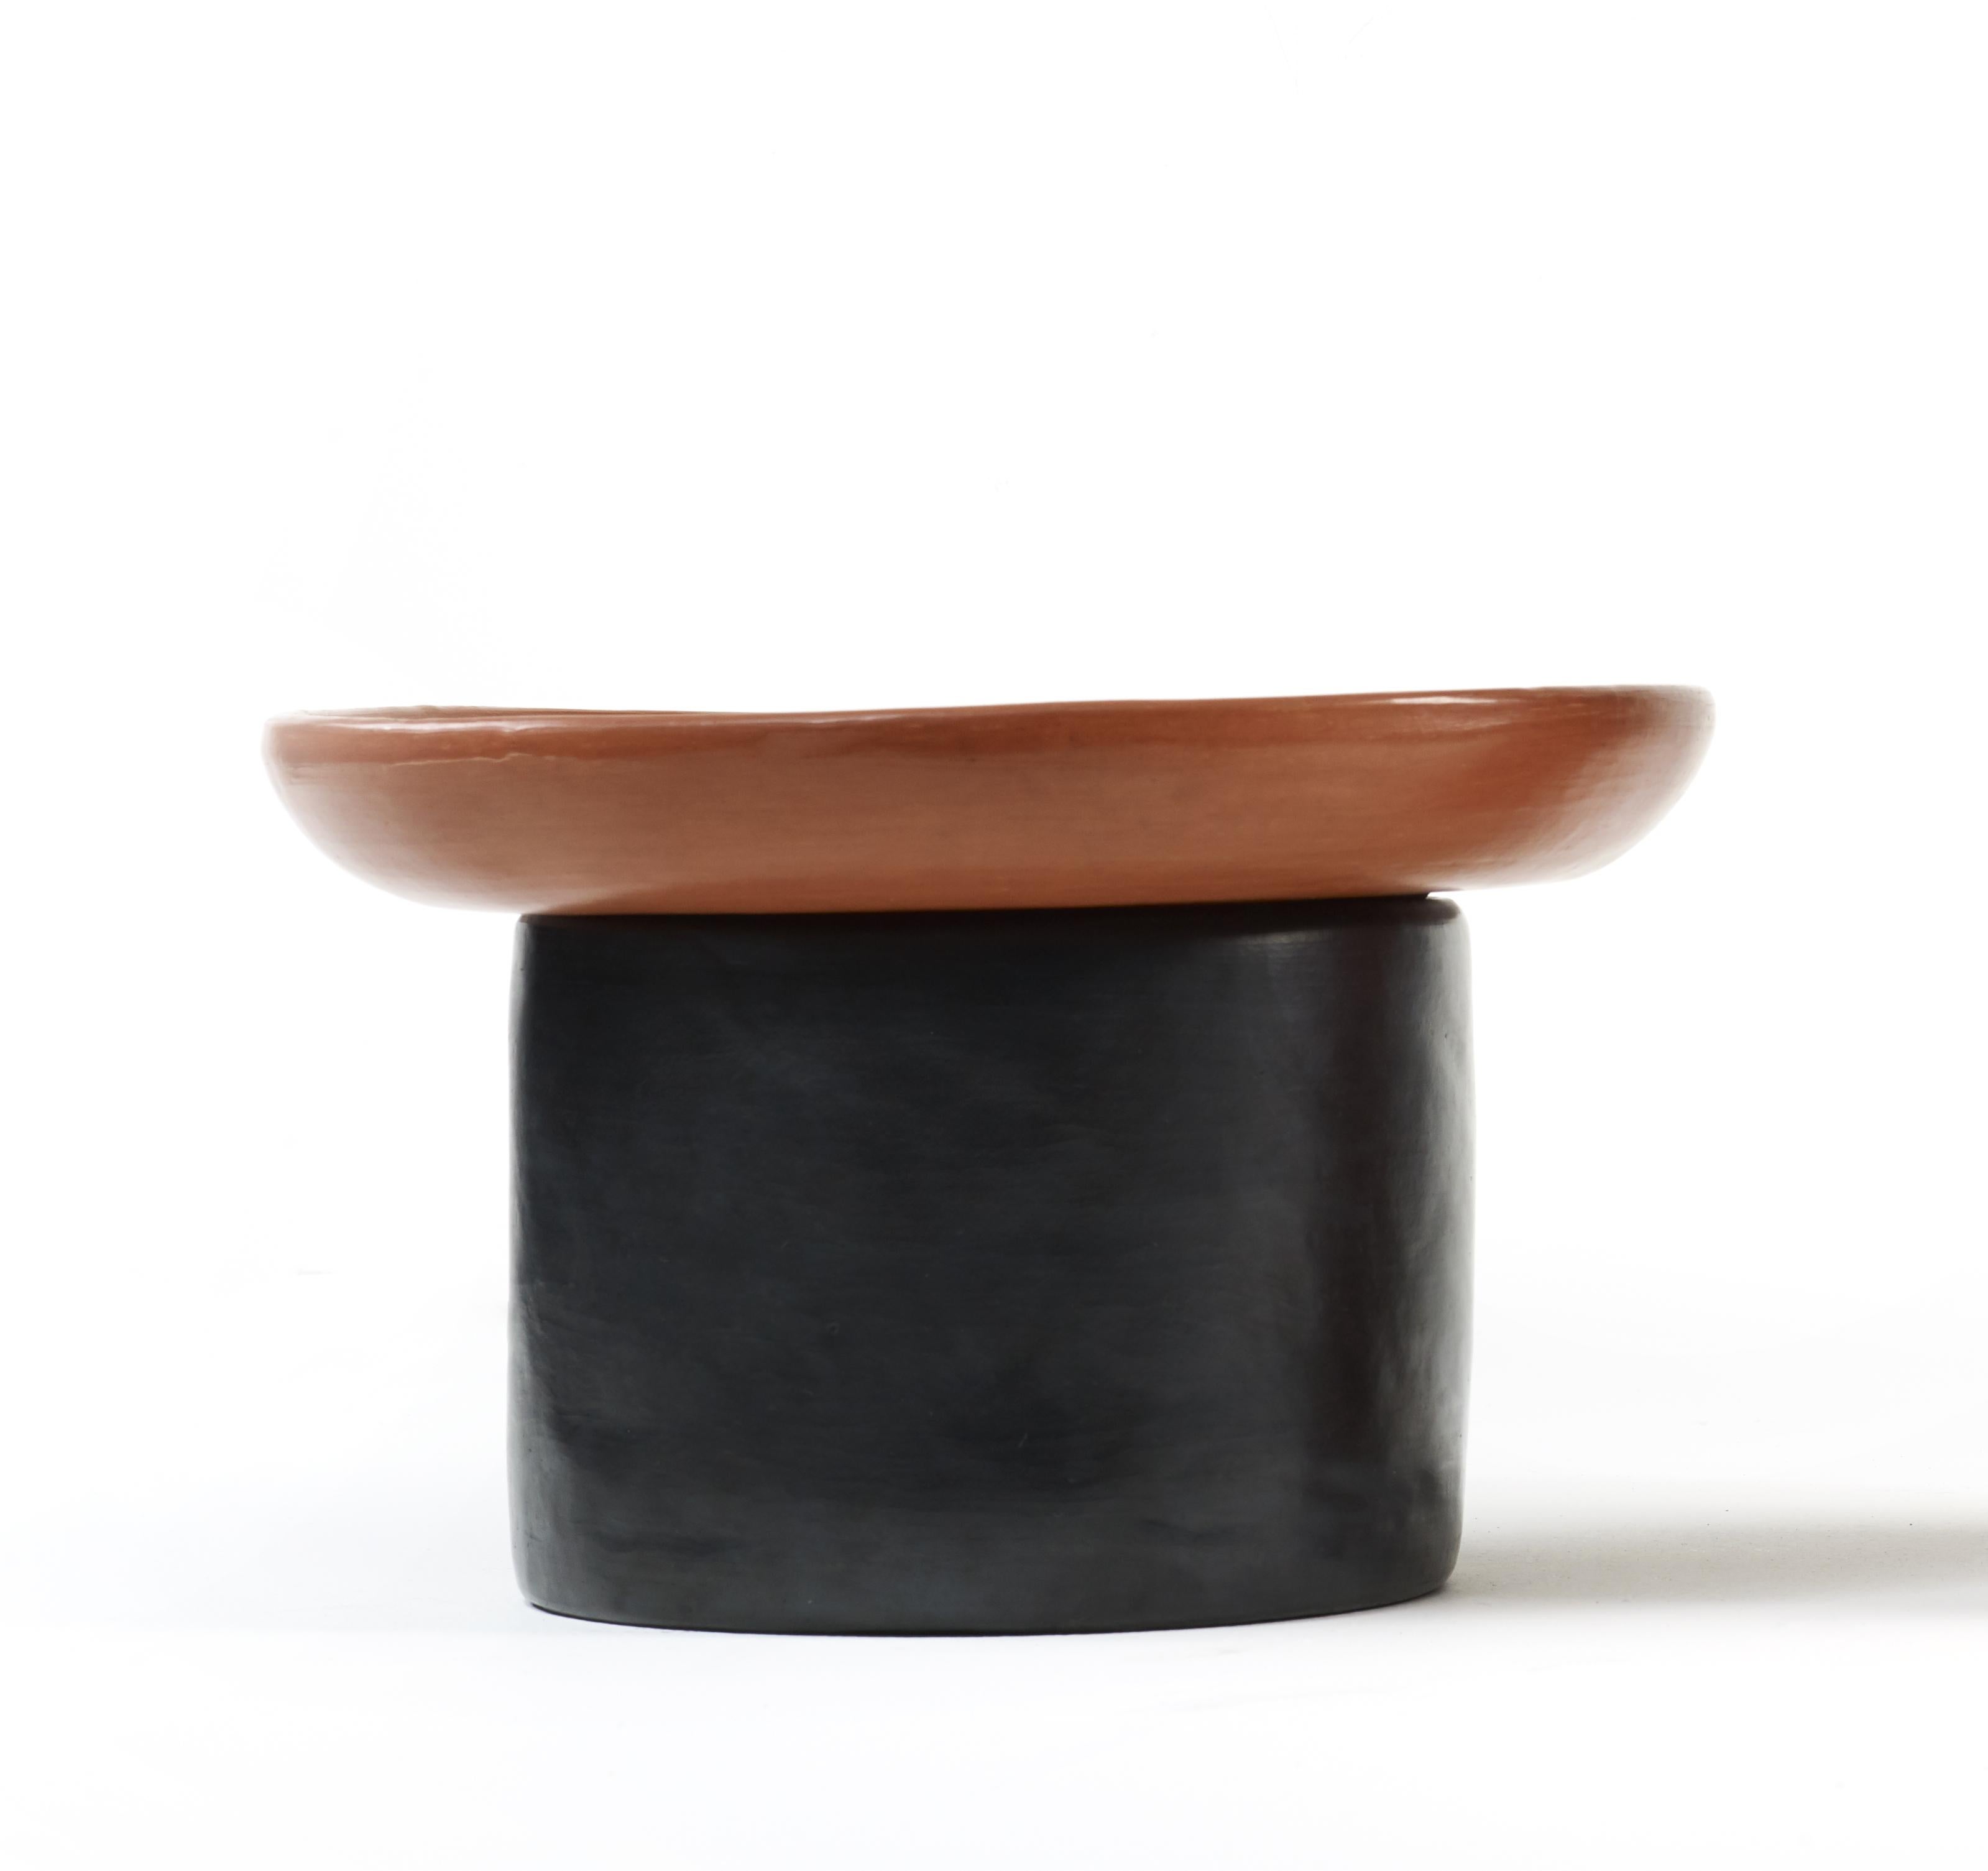 Black/red small nuna side table by Sebastian Herkner
Materials: Heat-resistant black and red ceramic. 
Technique: Glazed. Oven cooked and polished with semi-precious stones.
Dimensions: Diameter 42 cm x height 23 cm 
Available in colors red, and